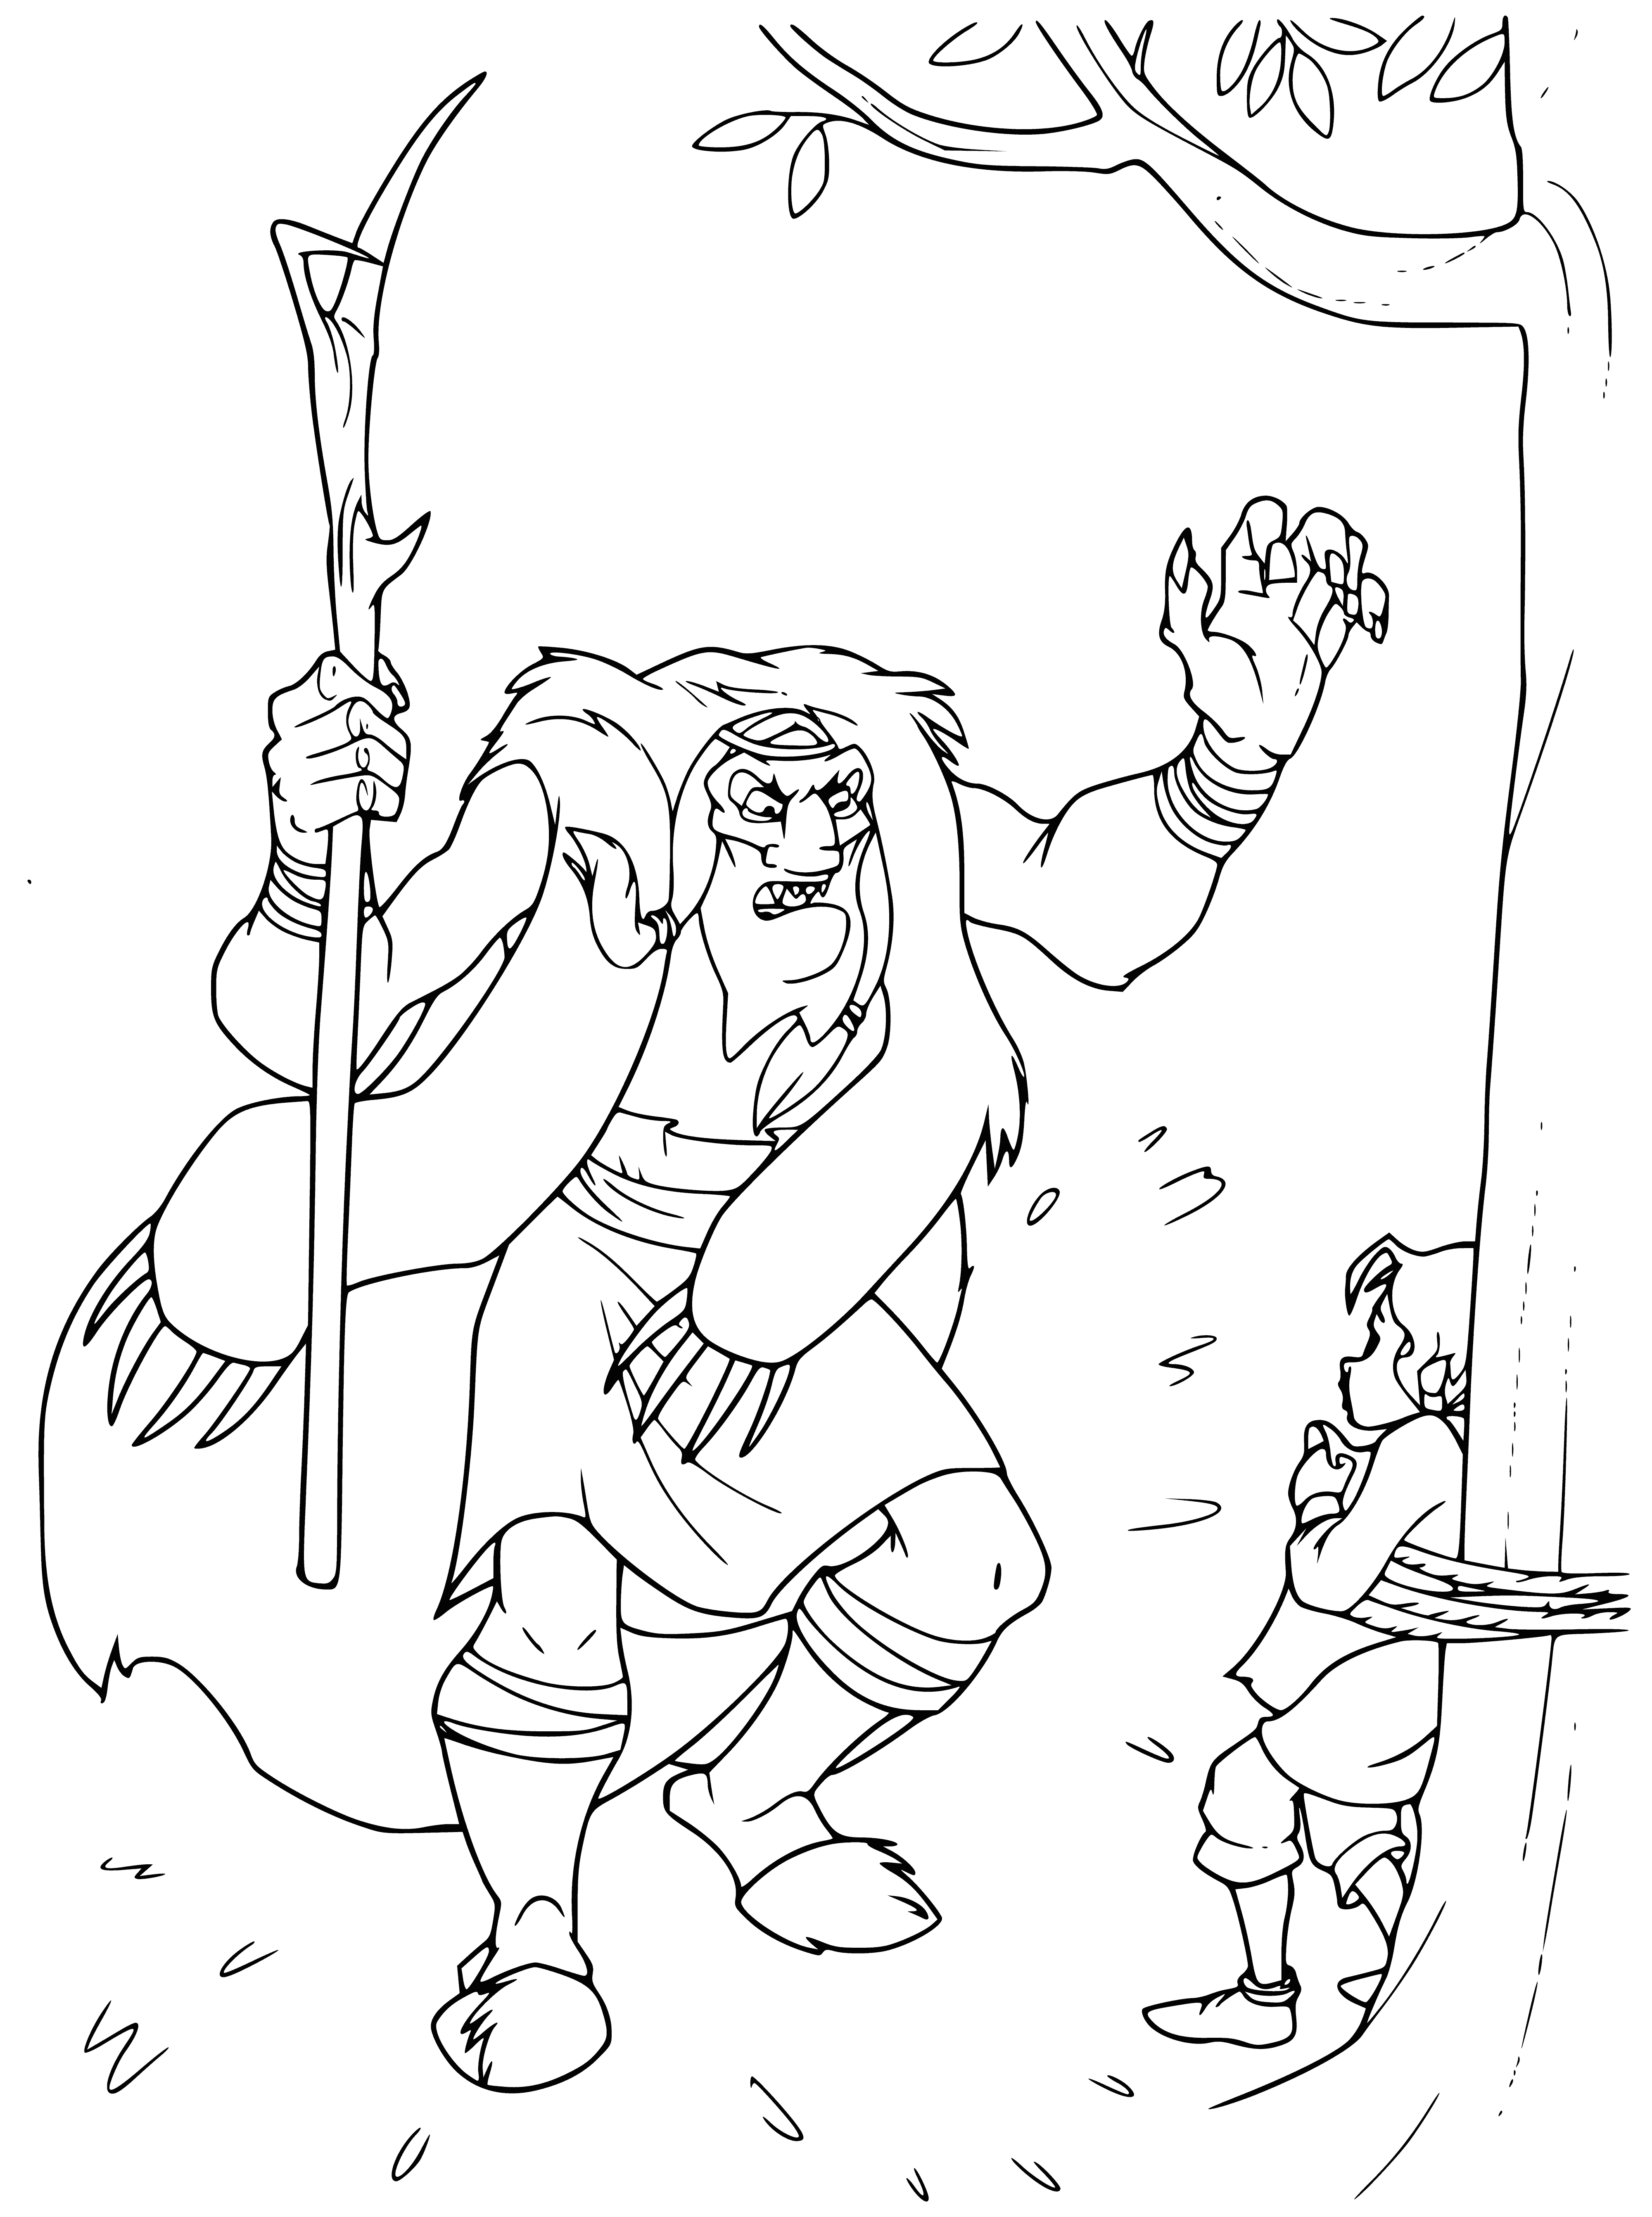 coloring page: Prince Vladimir attacks Aleksha with sword and shield. Aleksha blocks with own sword, but is wounded and in pain.